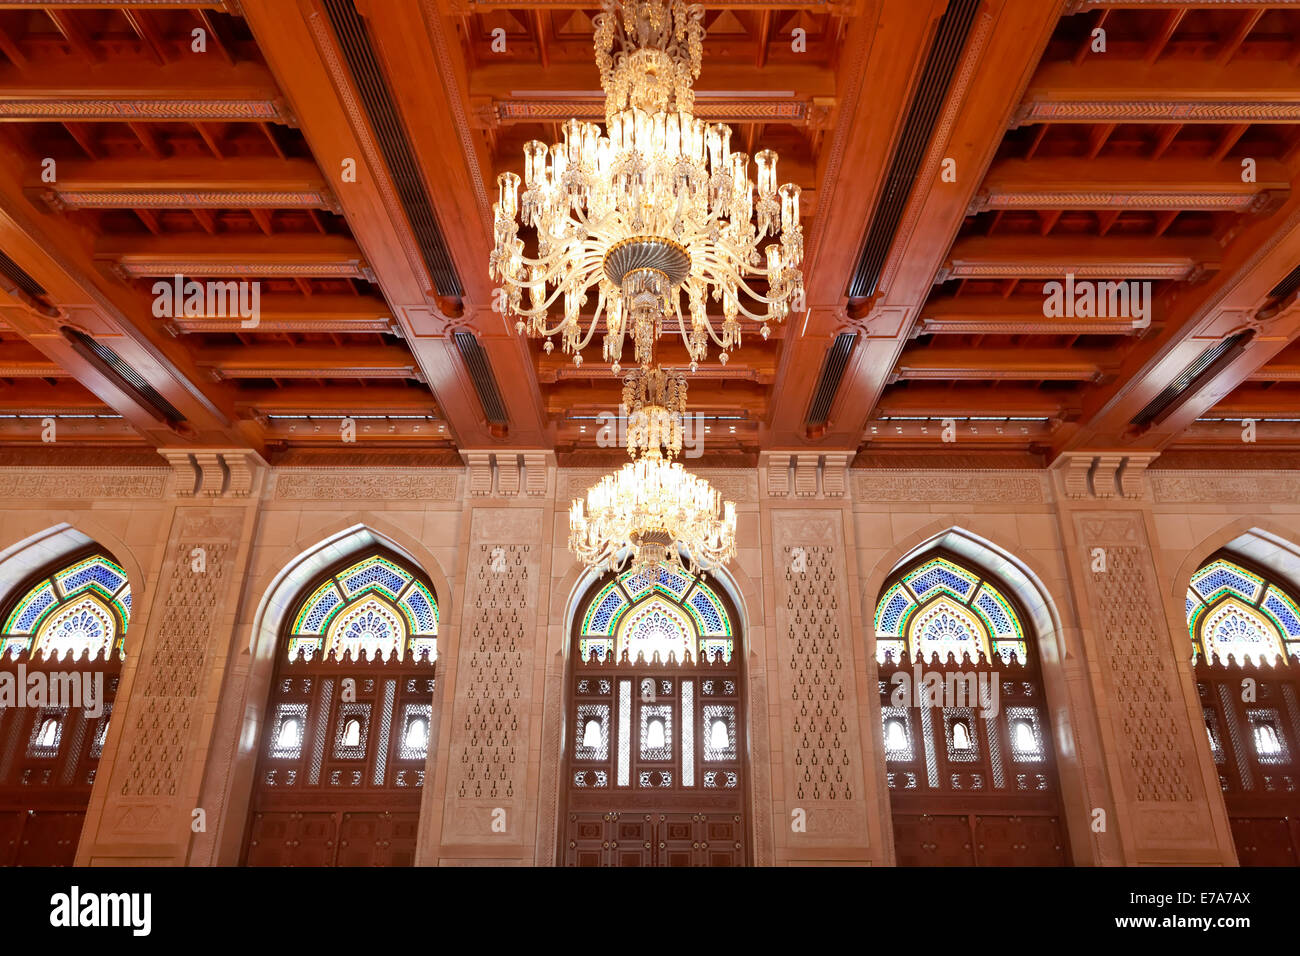 Prayer room for women with a wooden ceiling and a chandelier, Sultan Qaboos Grand Mosque, Muscat, Oman Stock Photo